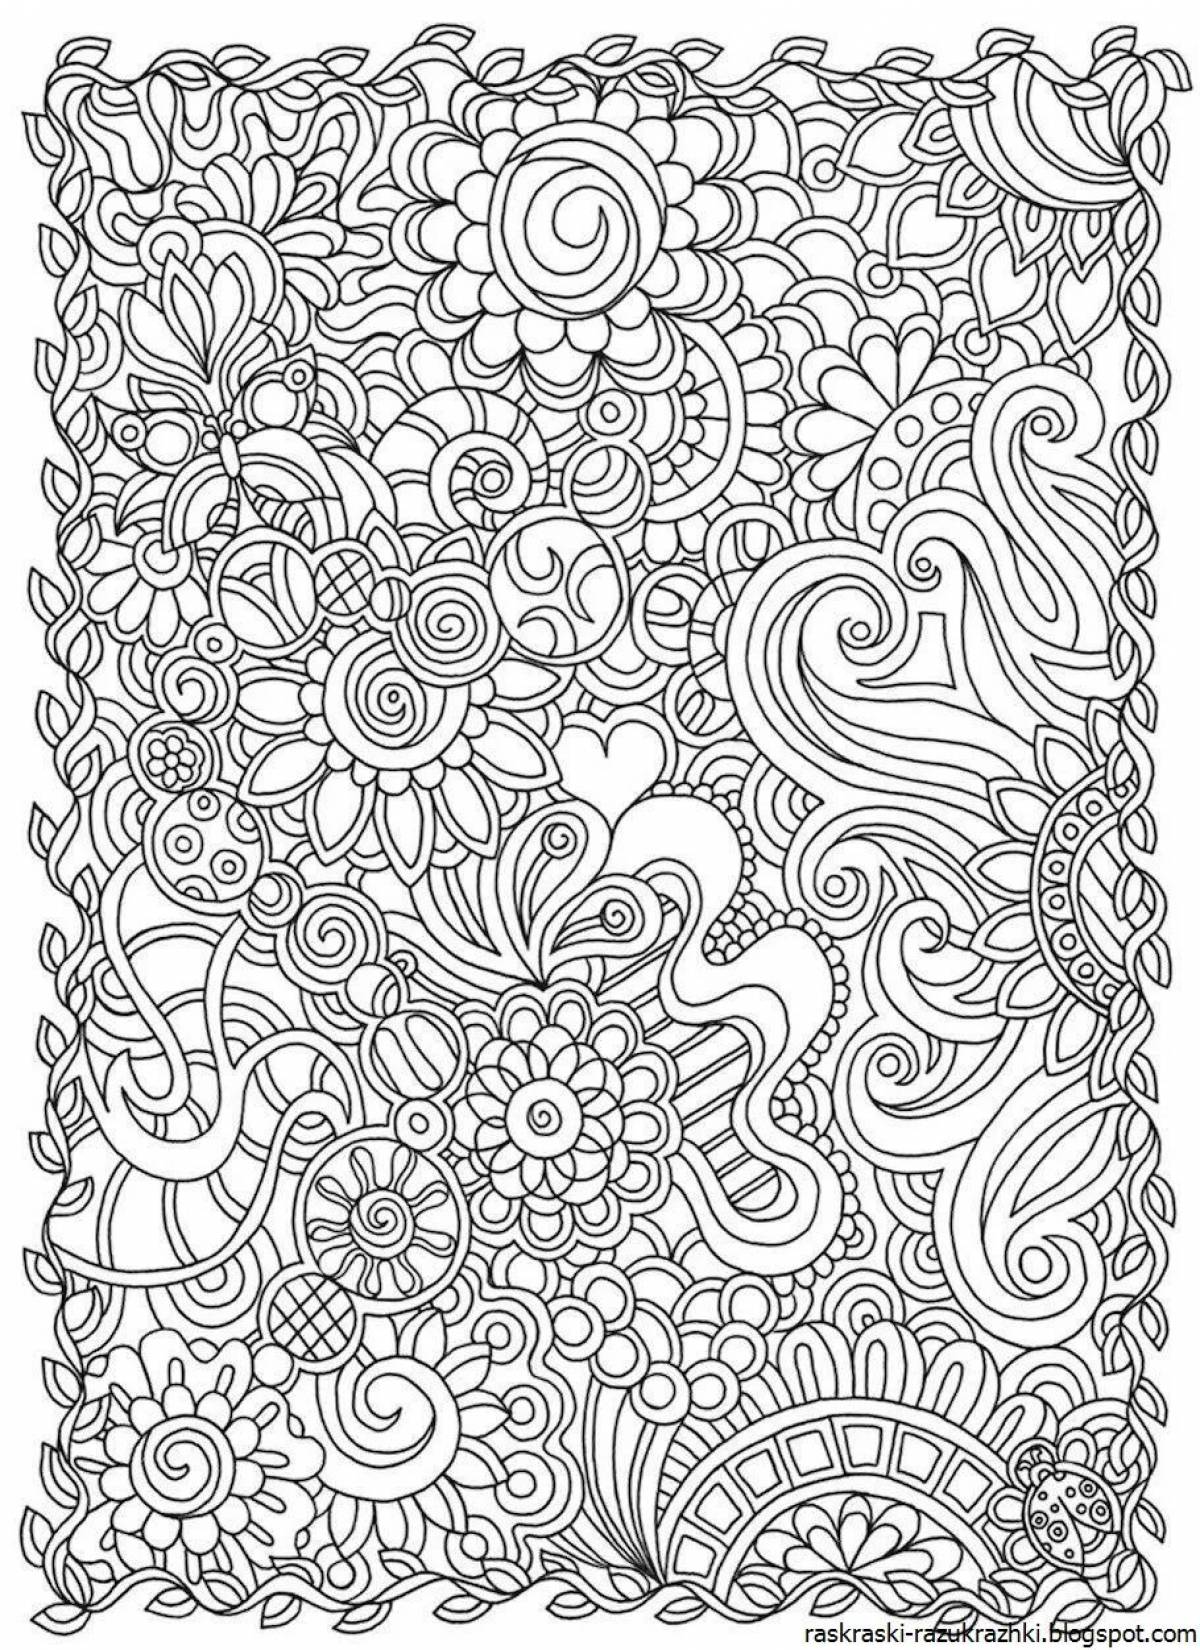 Glitter patterned coloring book